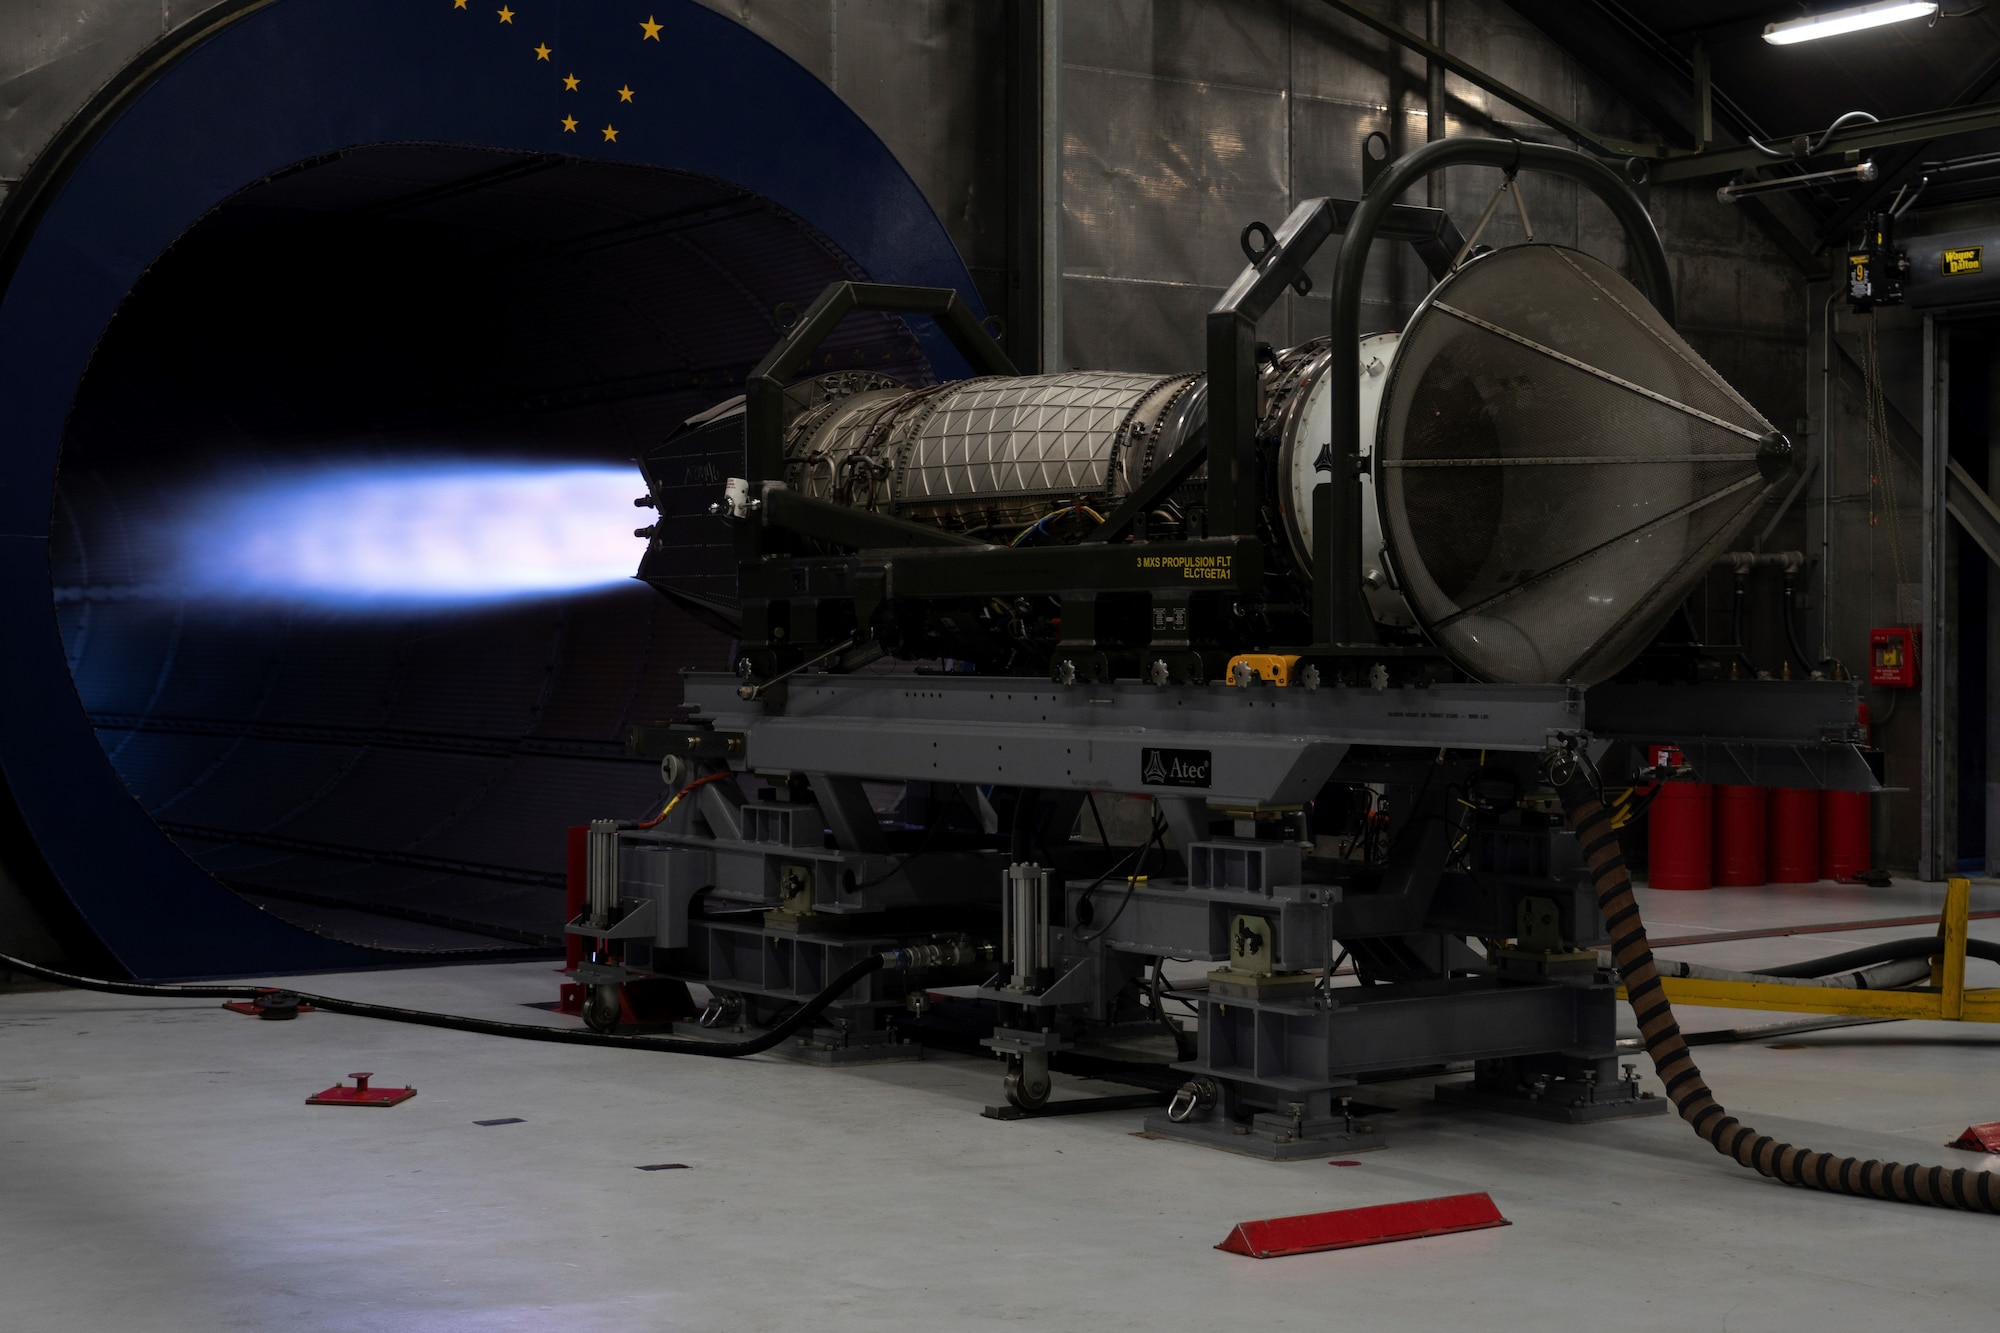 A Pratt and Whitney F119 Jet Engine goes through an operational test to ensure the engine meets all test parameters and can safely be installed in an F-22 aircraft at Joint Base Elmendorf-Richardson, Alaska, Sept. 10, 2020.